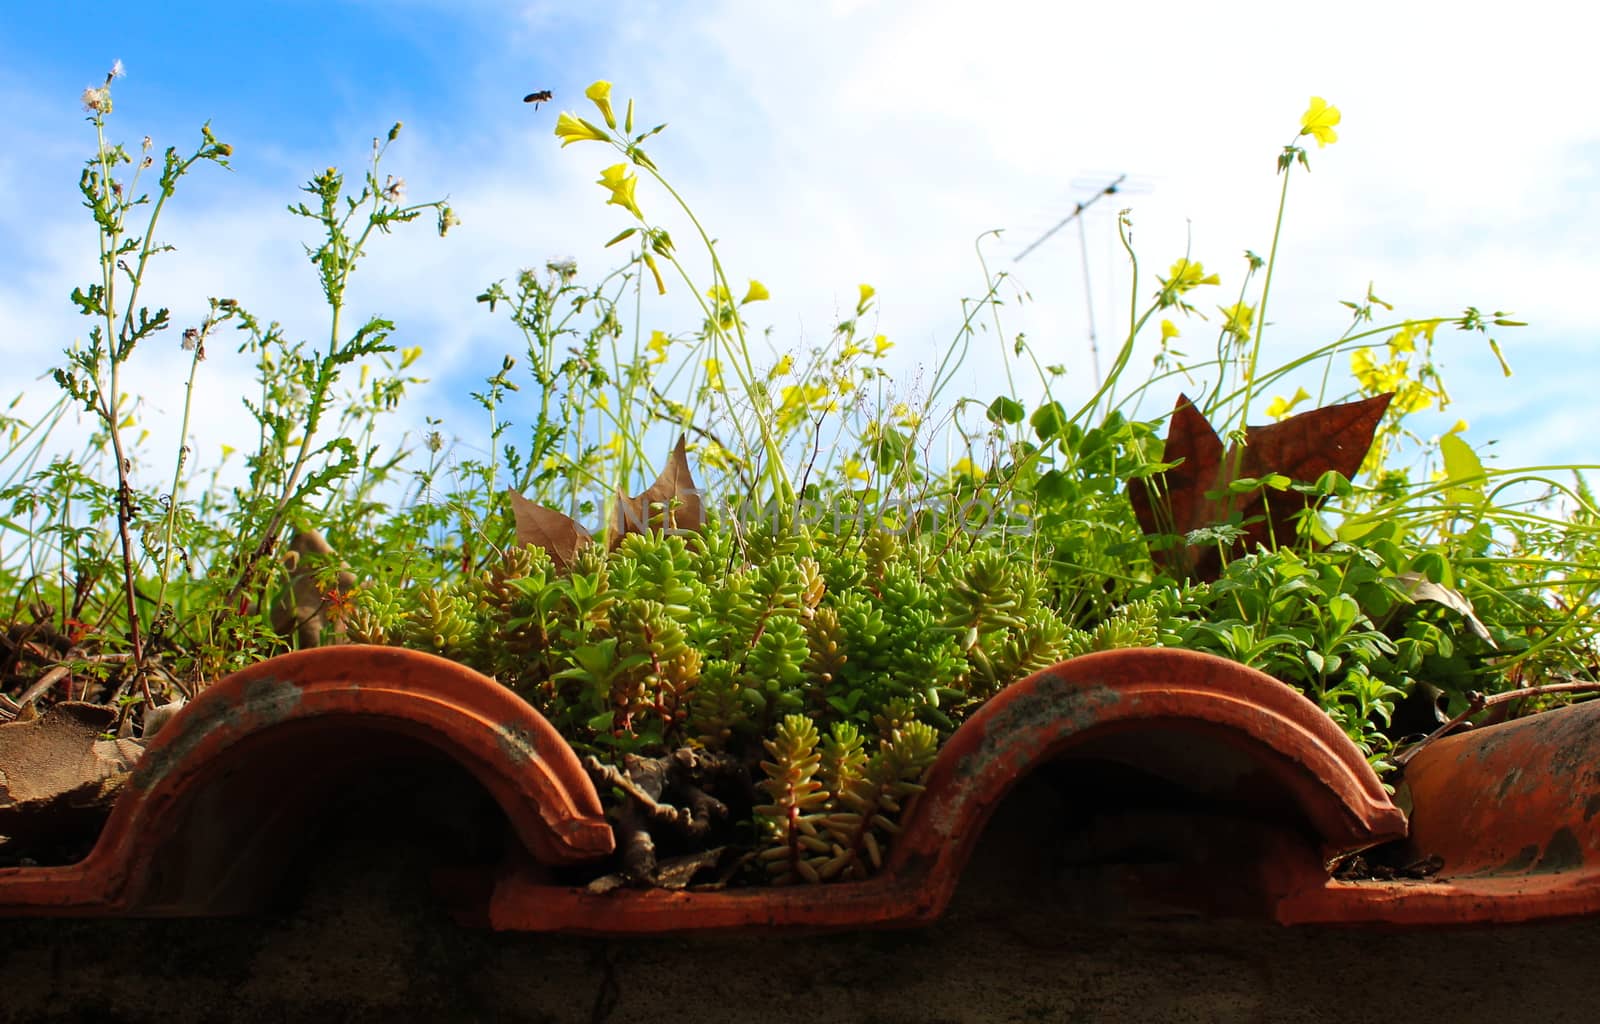 A beautiful photo of a powerful nature growing plants on an old roof. Dry leaves, old plant remains, green plants and yellow flowers, the bee goes towards the flower. The true beauty of nature by mahirrov